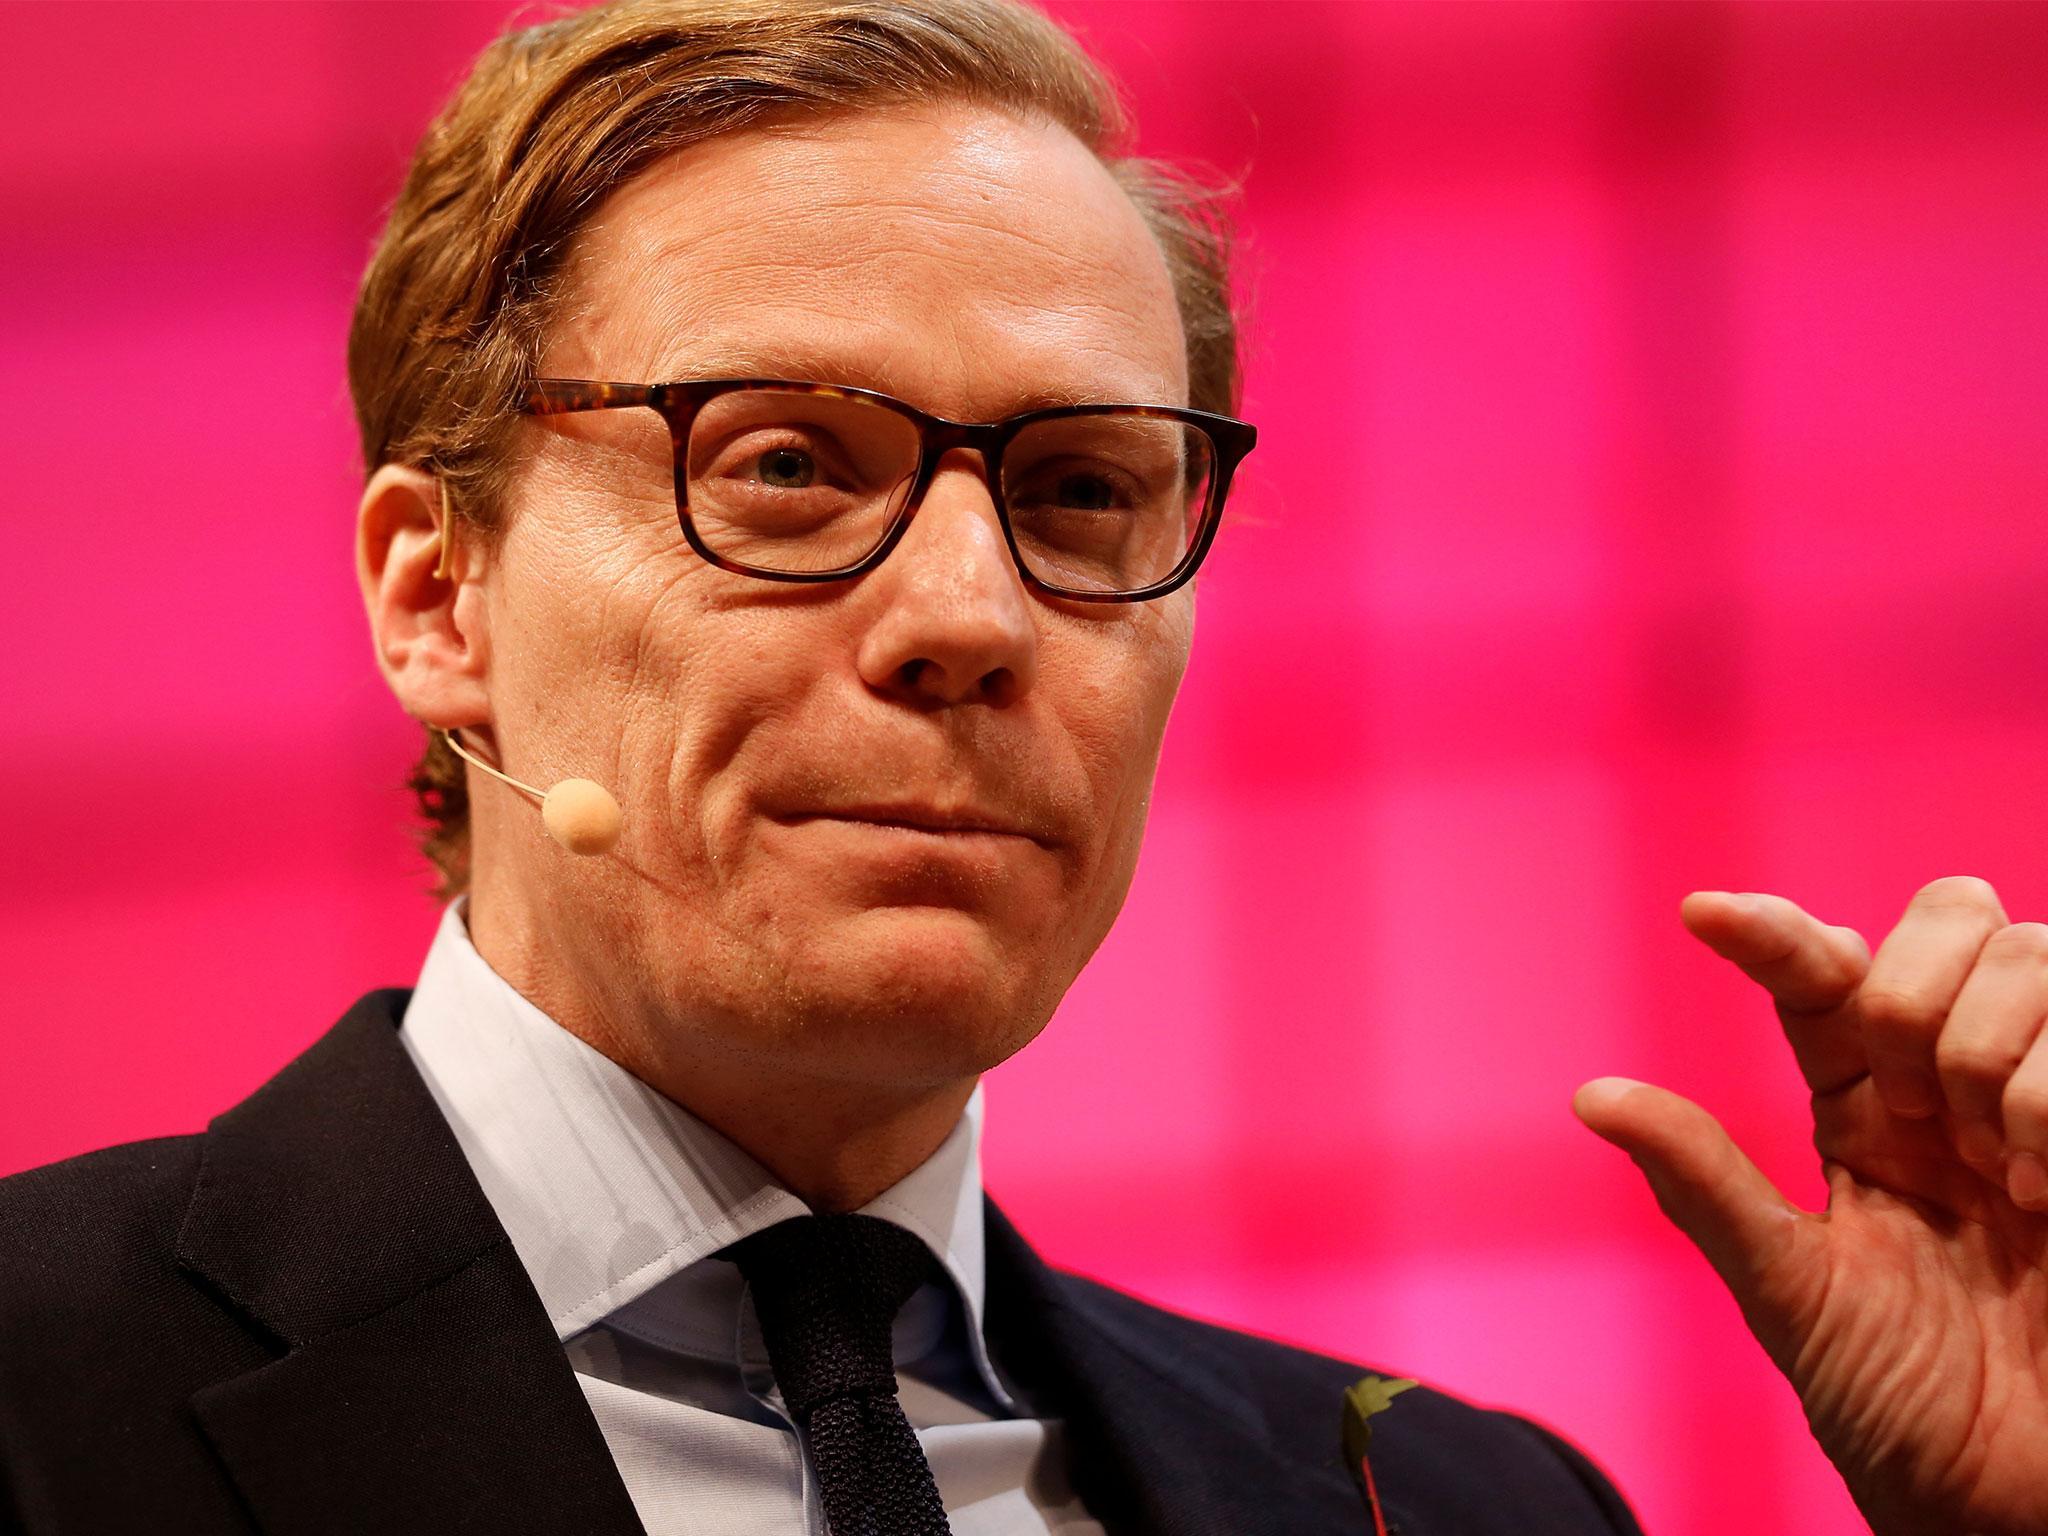 Alexander Nix said his company had not collected personal information from individuals without their consent through Facebook apps